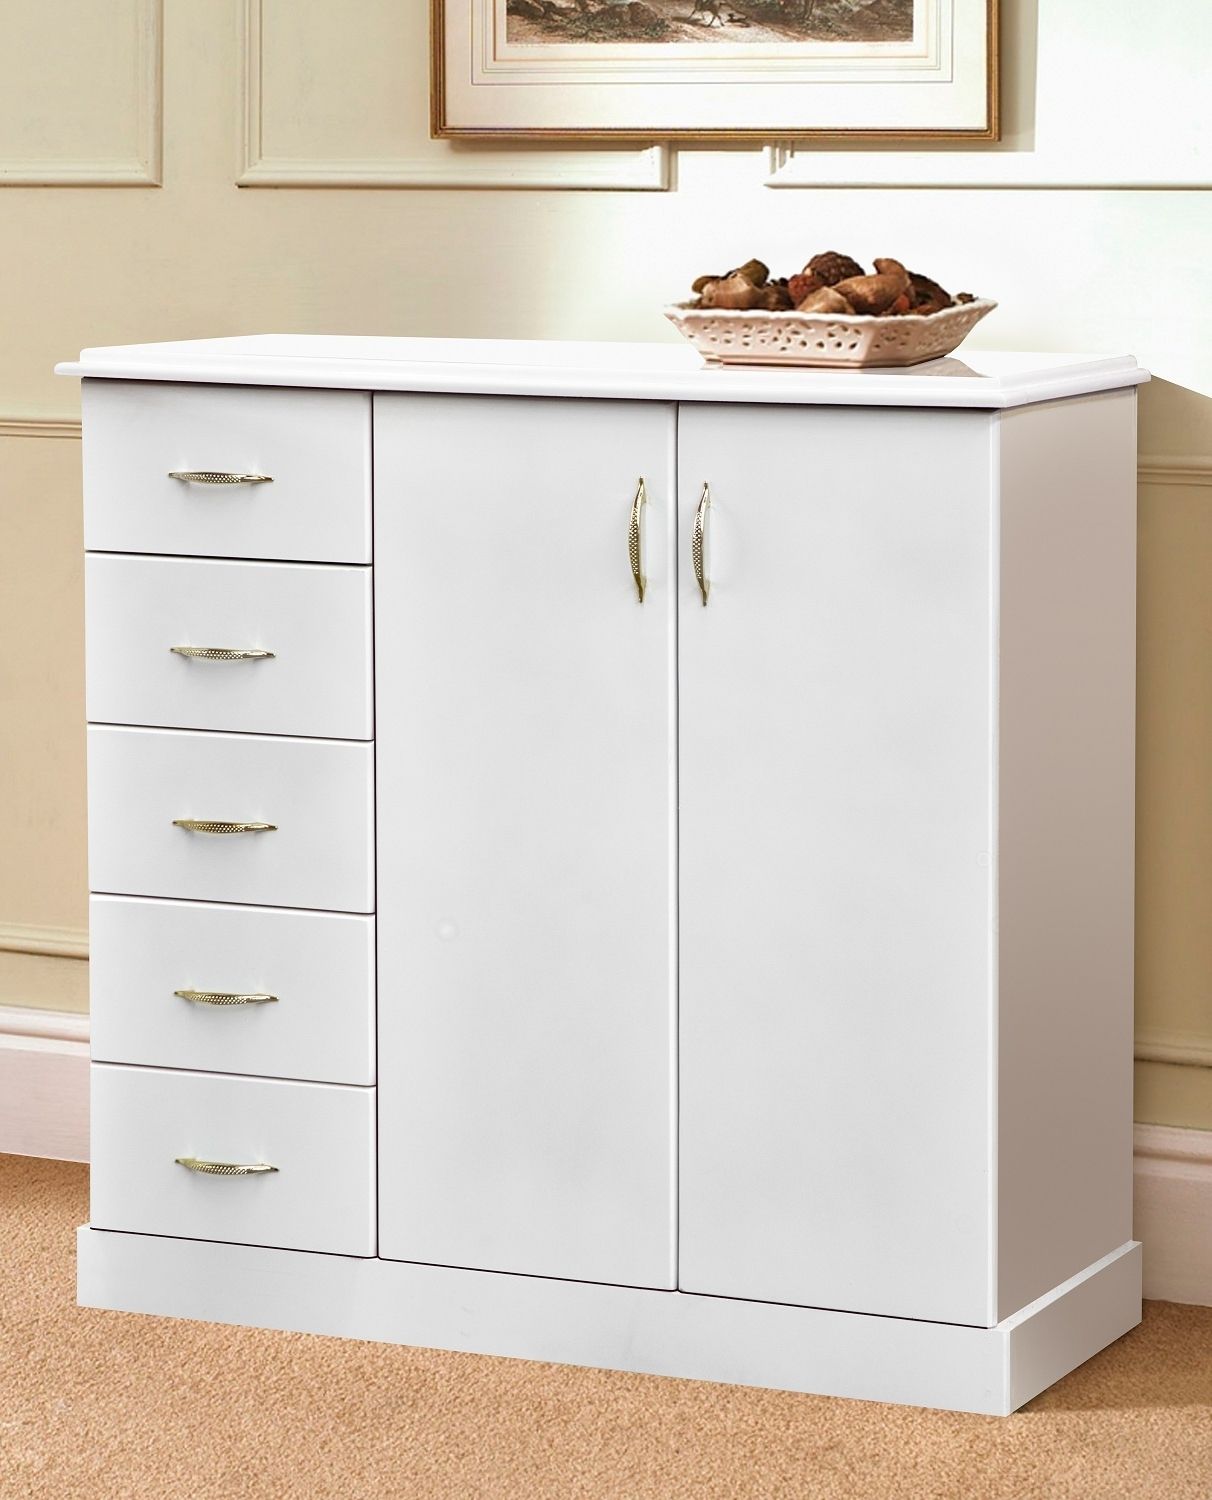 Home Decor: Wonderful Chest Of Drawers To Complete Lindie Wardrobe Within Preferred Cheap Wardrobes And Chest Of Drawers (View 1 of 15)